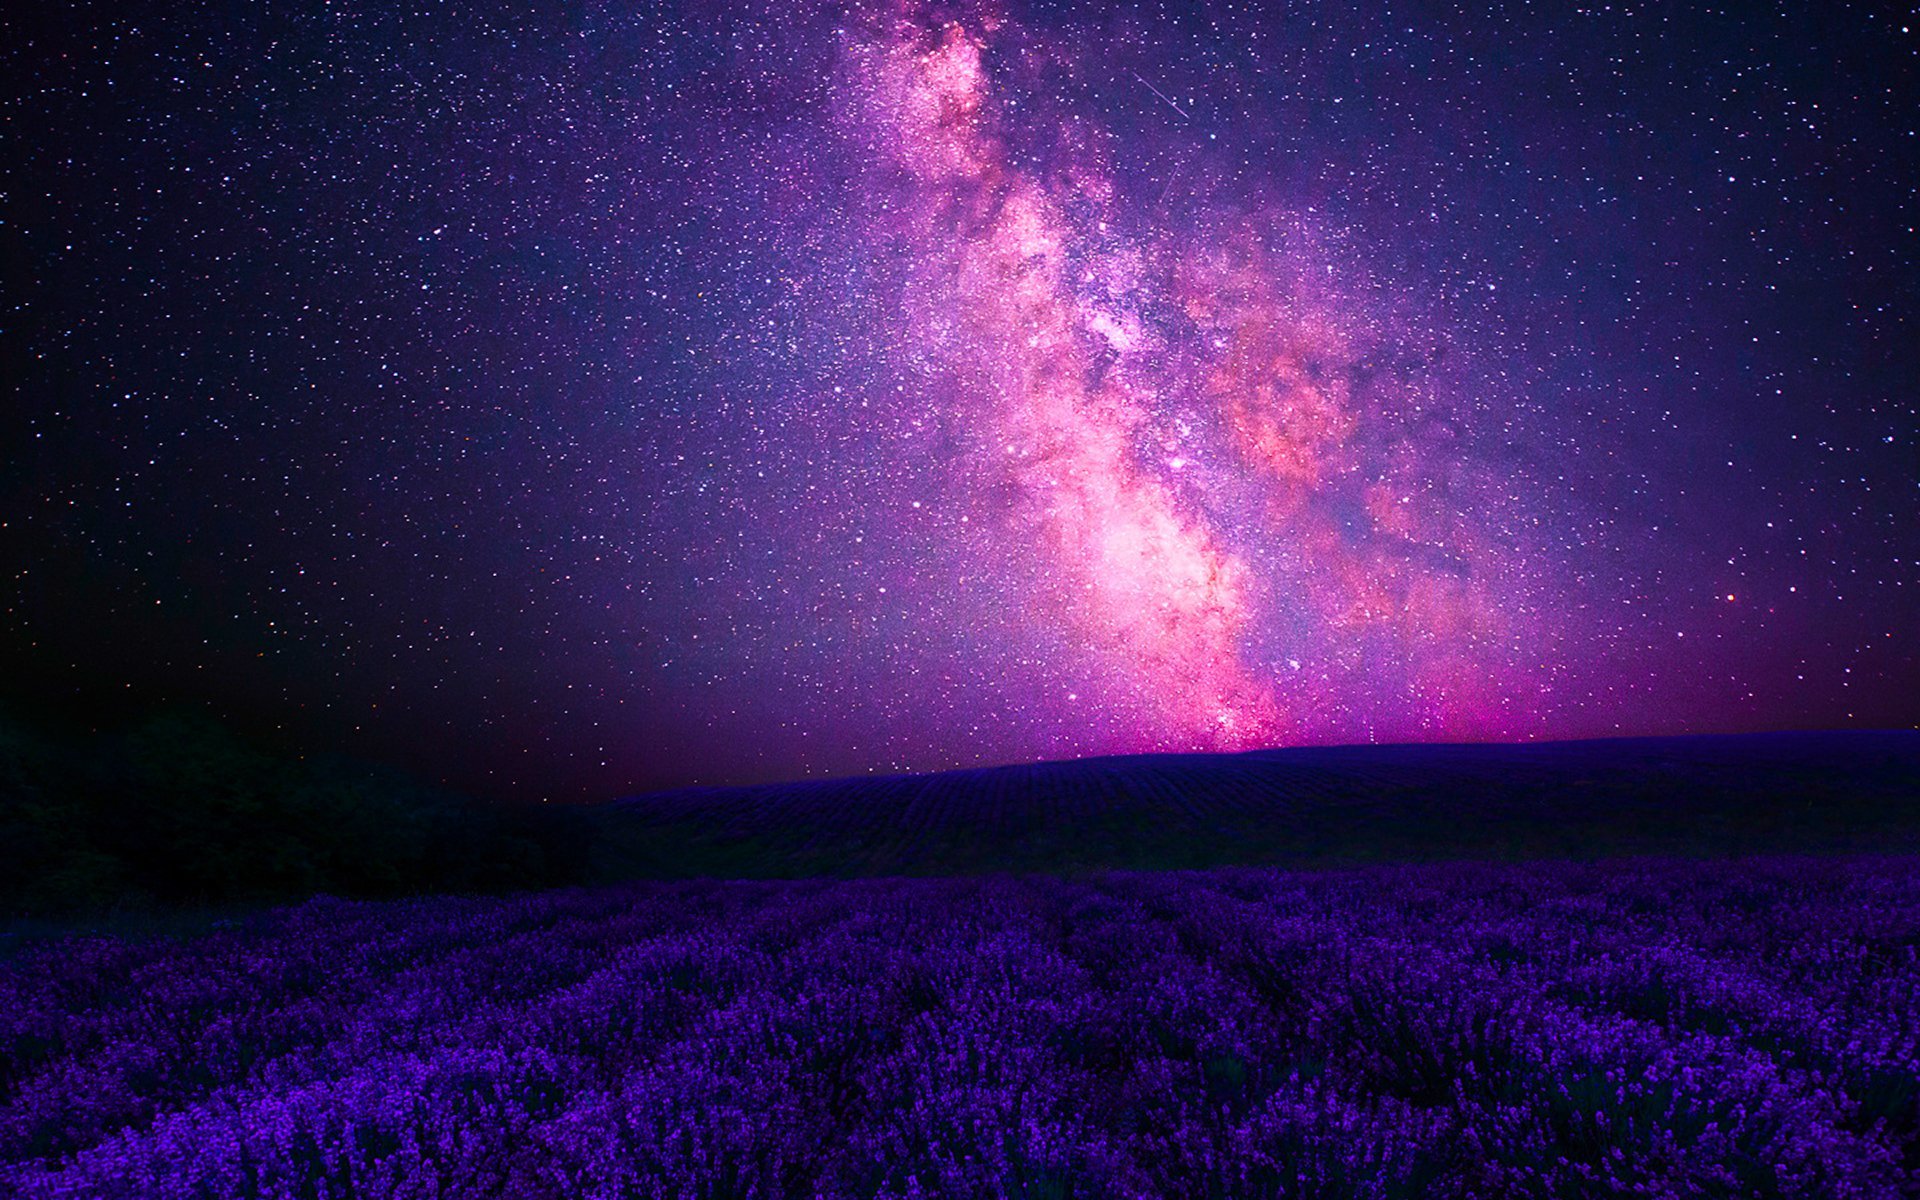 Pink Galaxy over Lavender Field Full HD Wallpaper and